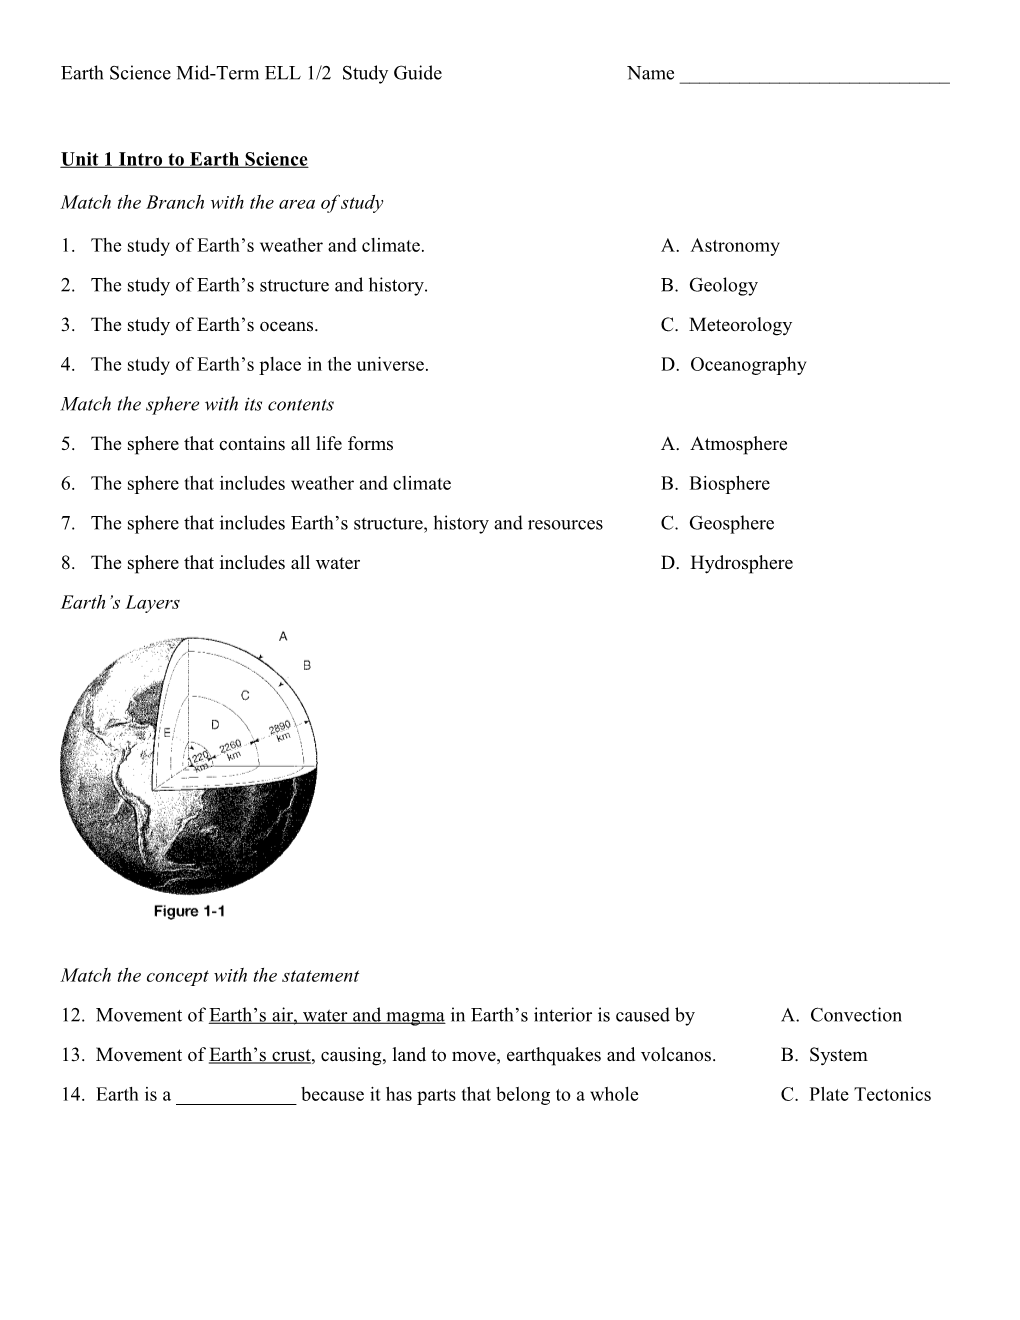 Unit 1 Intro to Earth Science